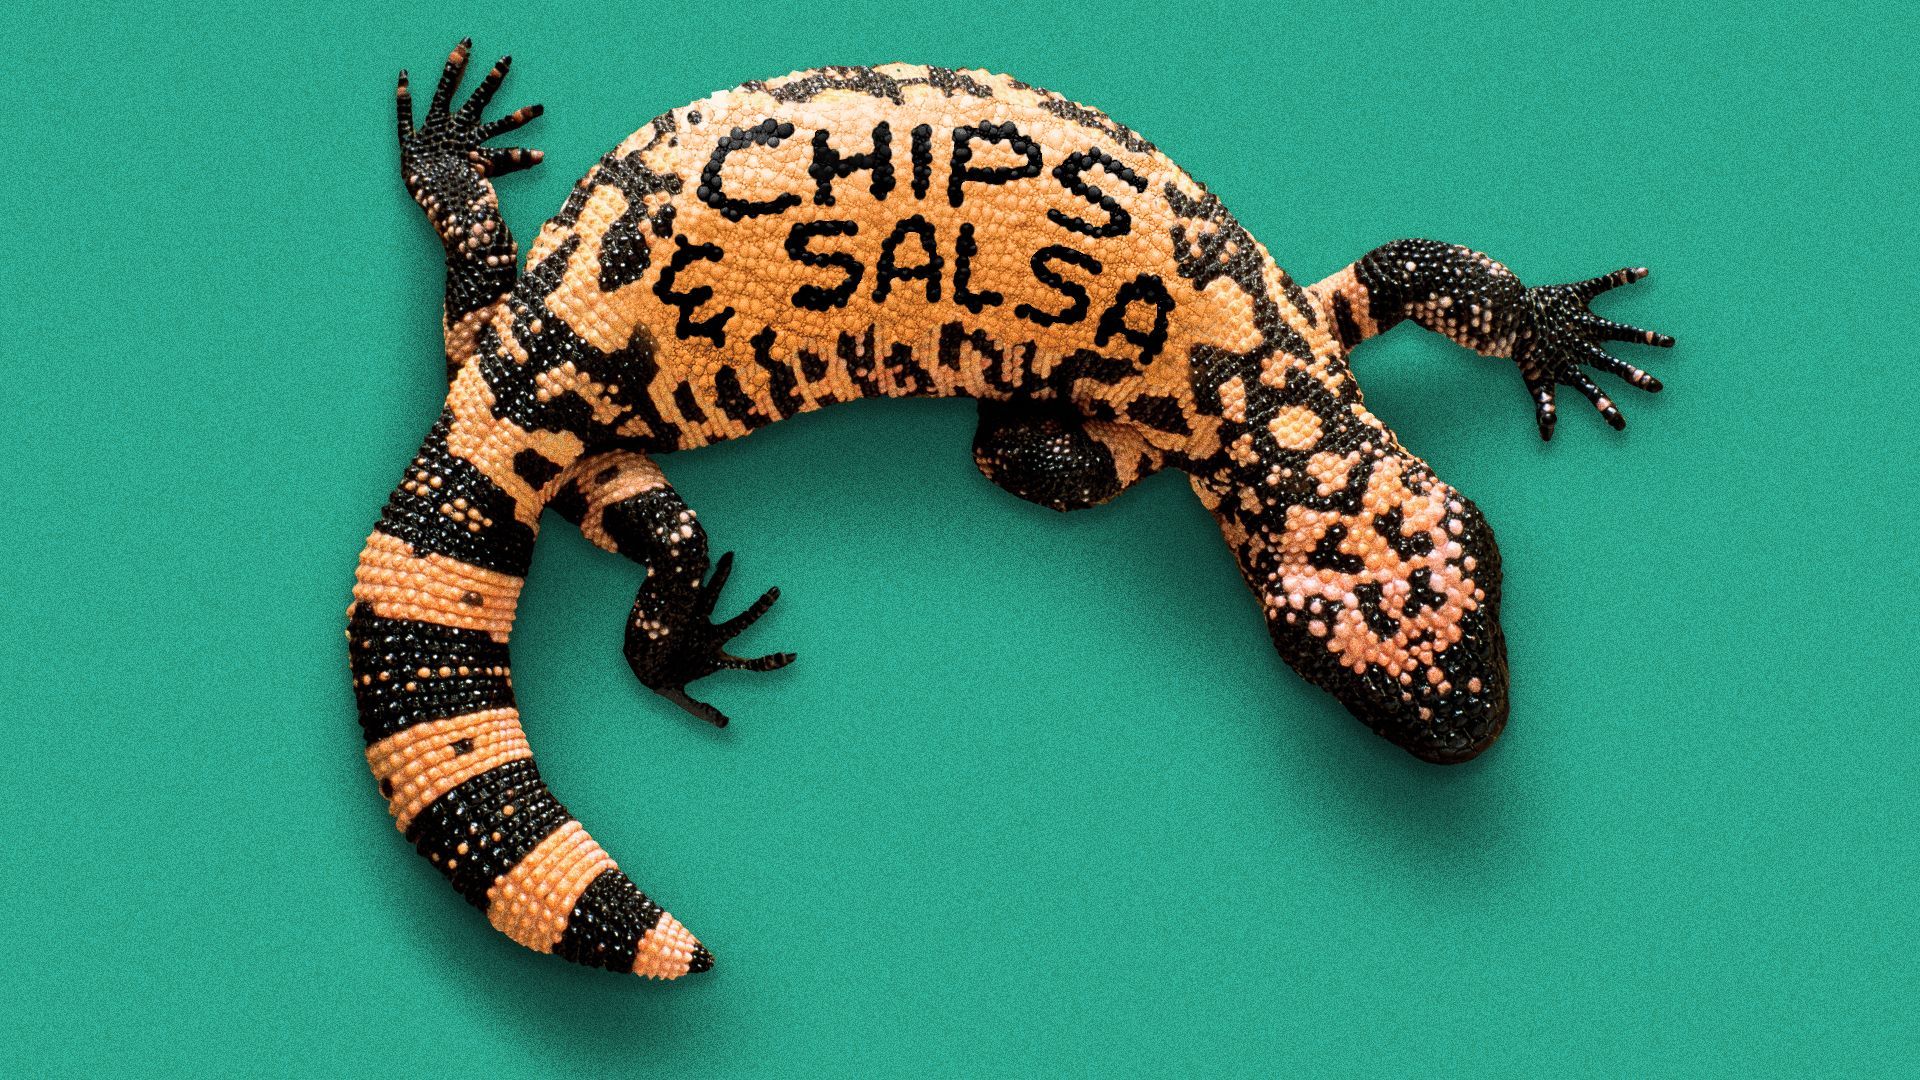 Illustration of a gila monster whose stripes spell "Chips and Salsa."